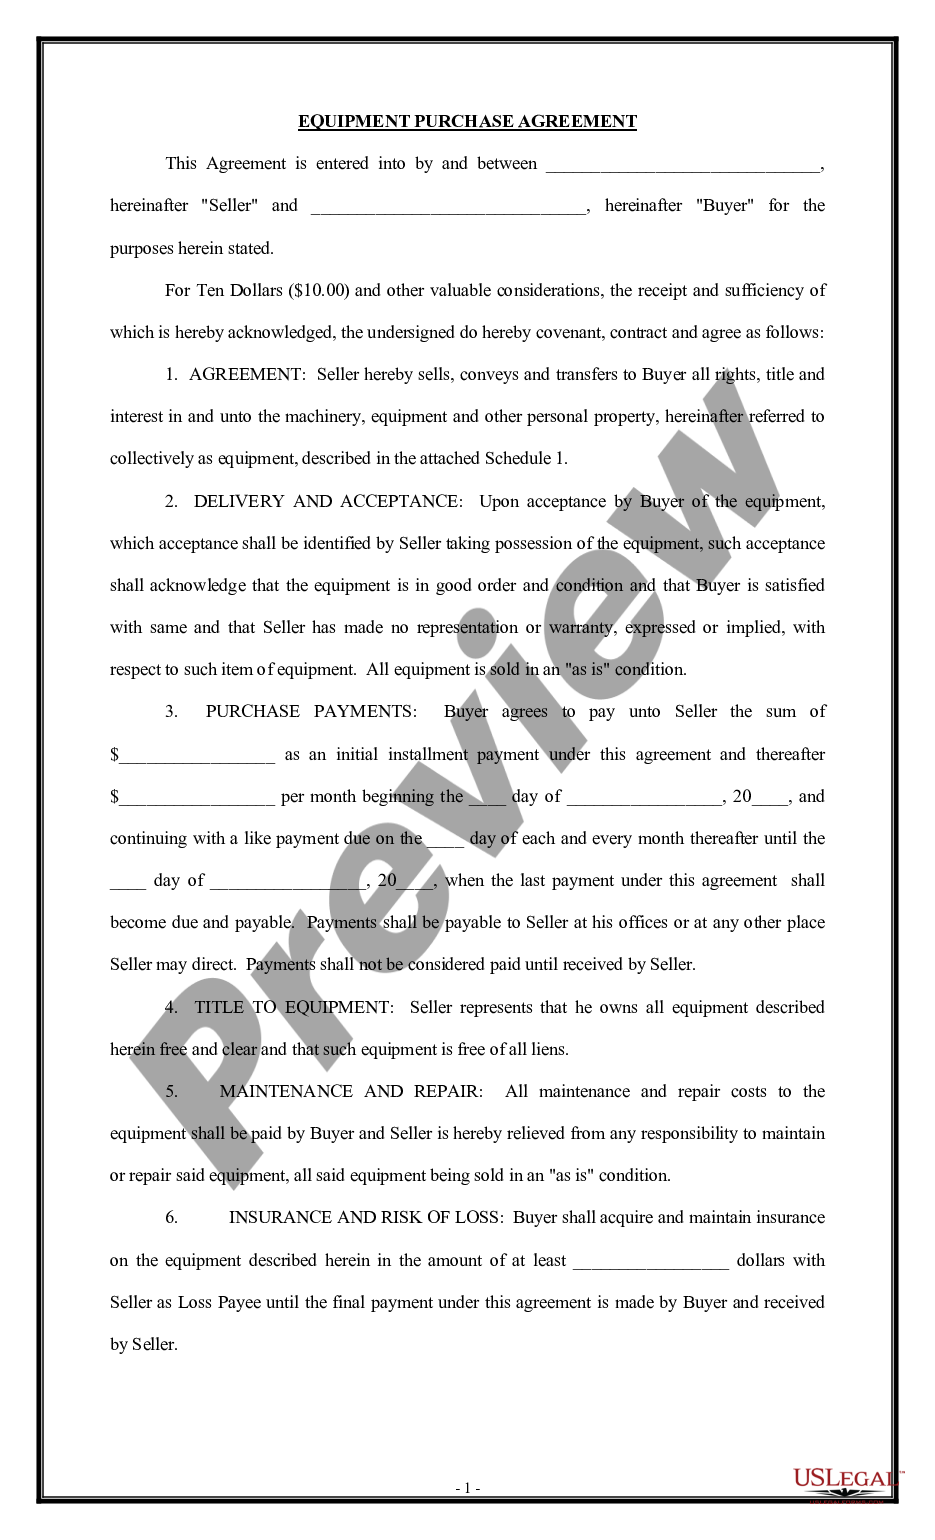 page 0 Equipment Purchase Agreement preview